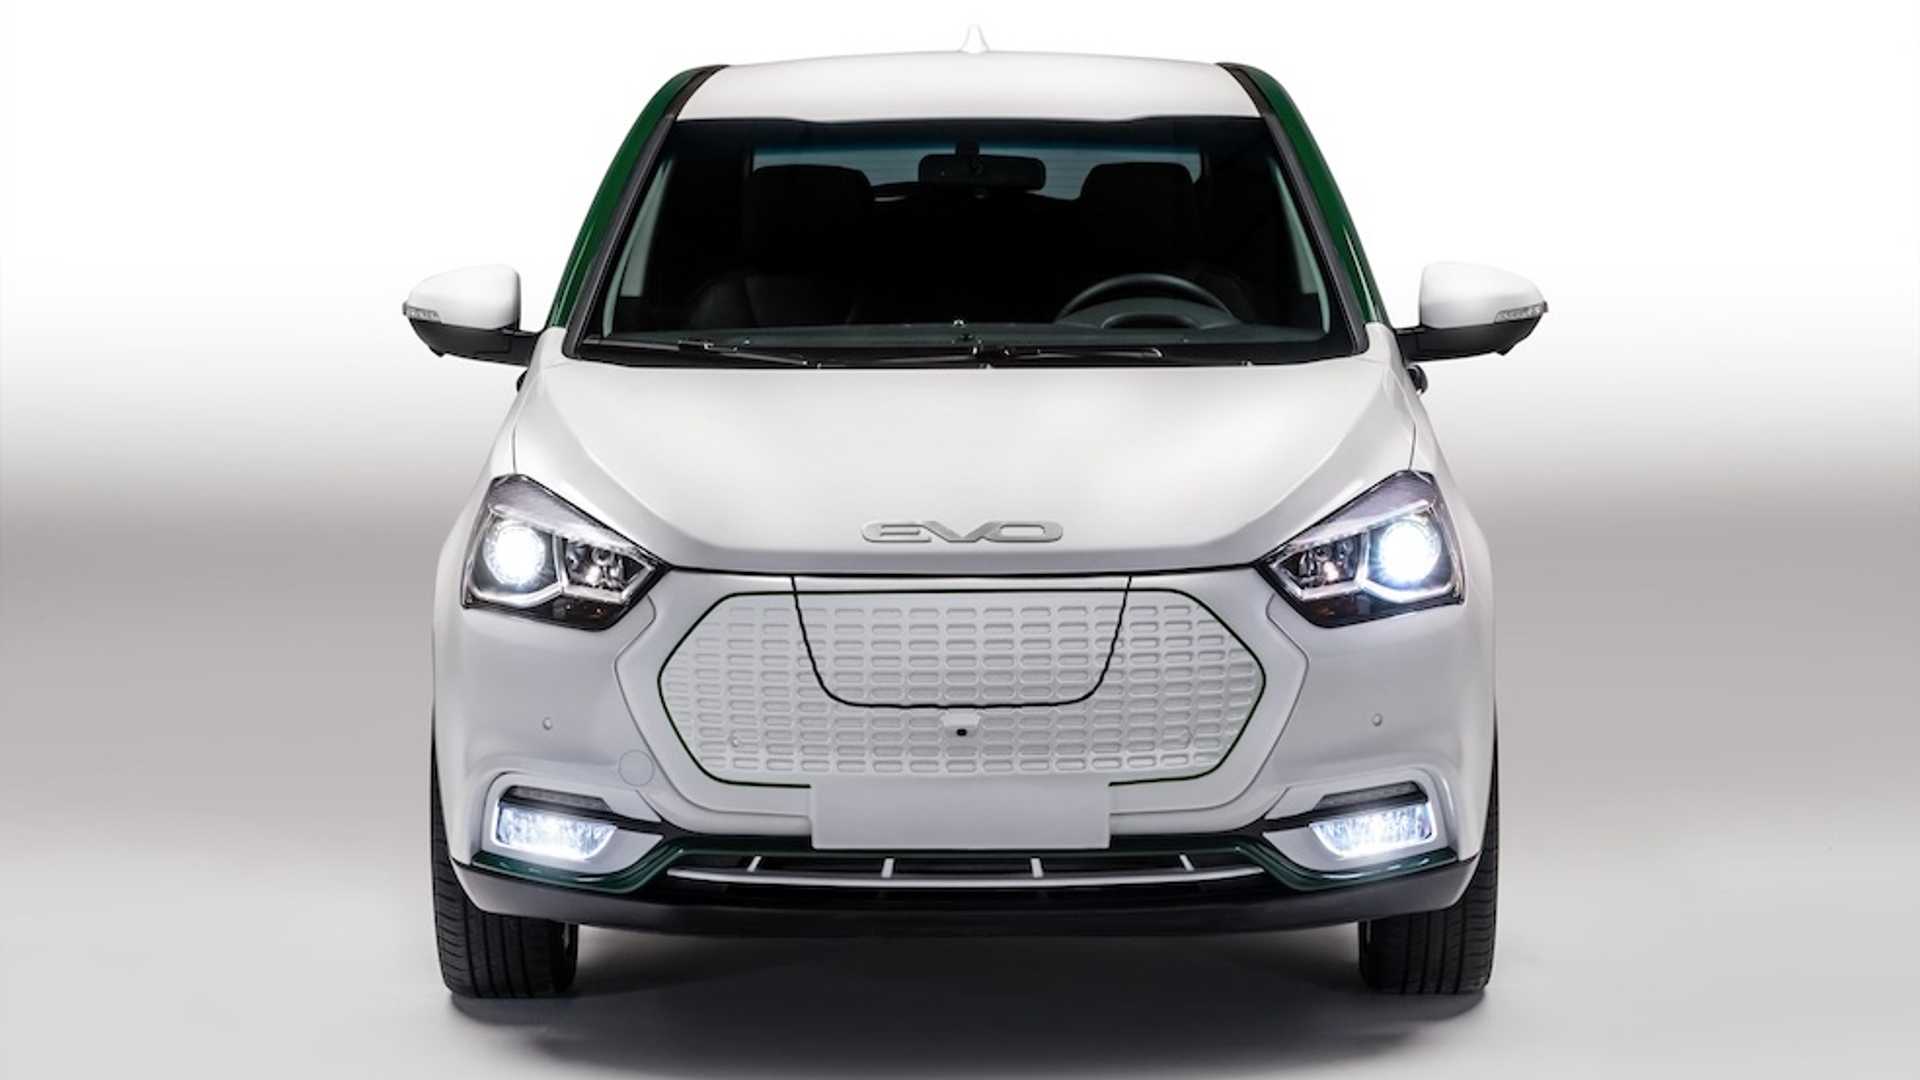 The EVO Electric, an Affordable Electric Car from DR Automobiles The